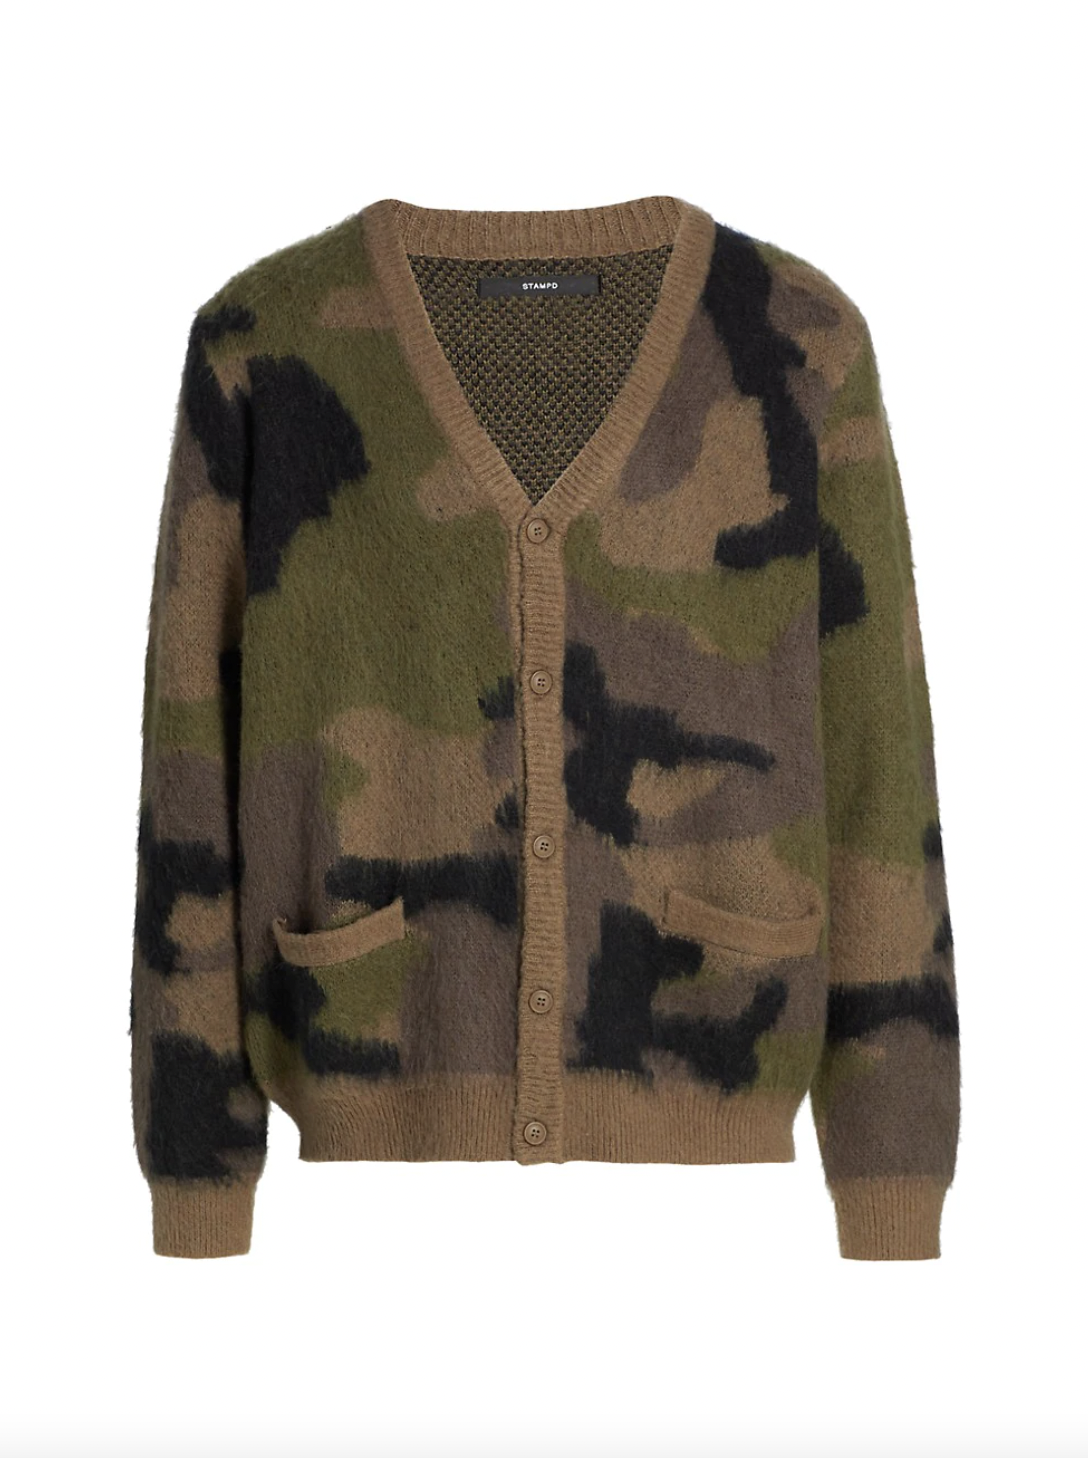 Madman Mens Sweater Pullover Camouflage Slim Fit Knitted Sweater Long Sleeve Knitted Street Wear 